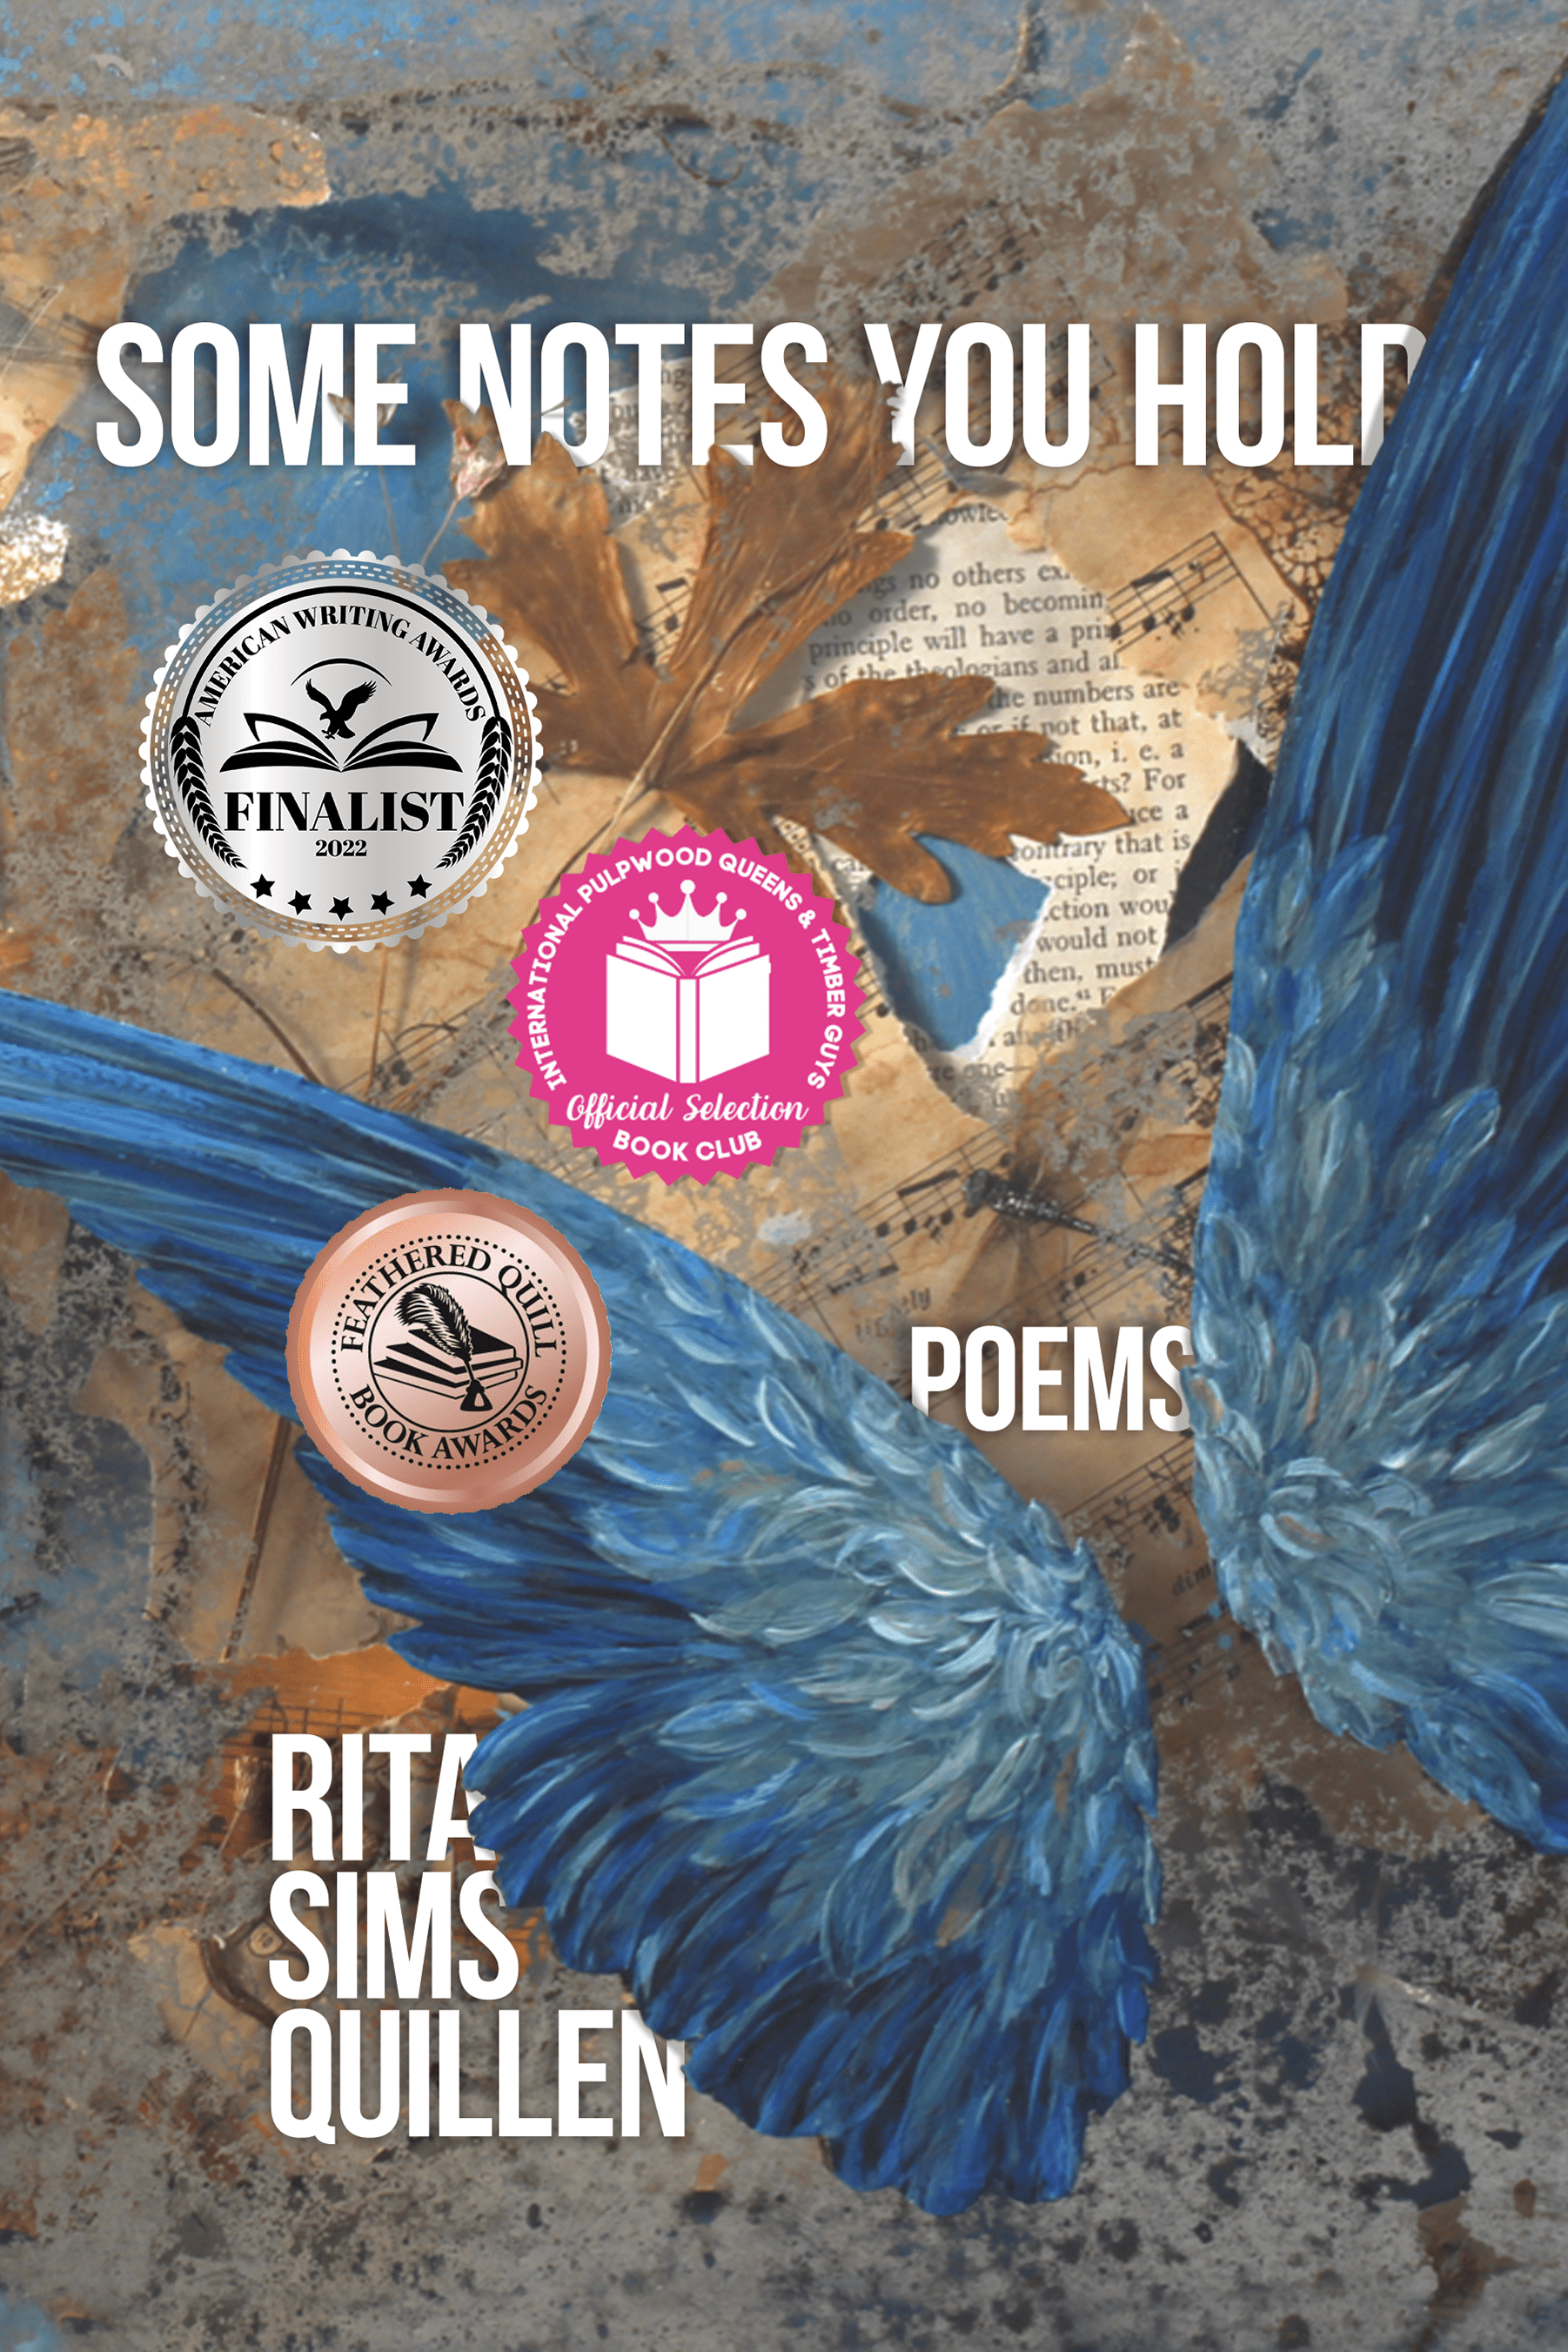 Some Notes You Hold: Poems by Rita Sims Quillen shows three awards superimposed over a cover painting by Suzanne Stryk with blue bird wings, dry brown leaves, and newspaper in a collage.